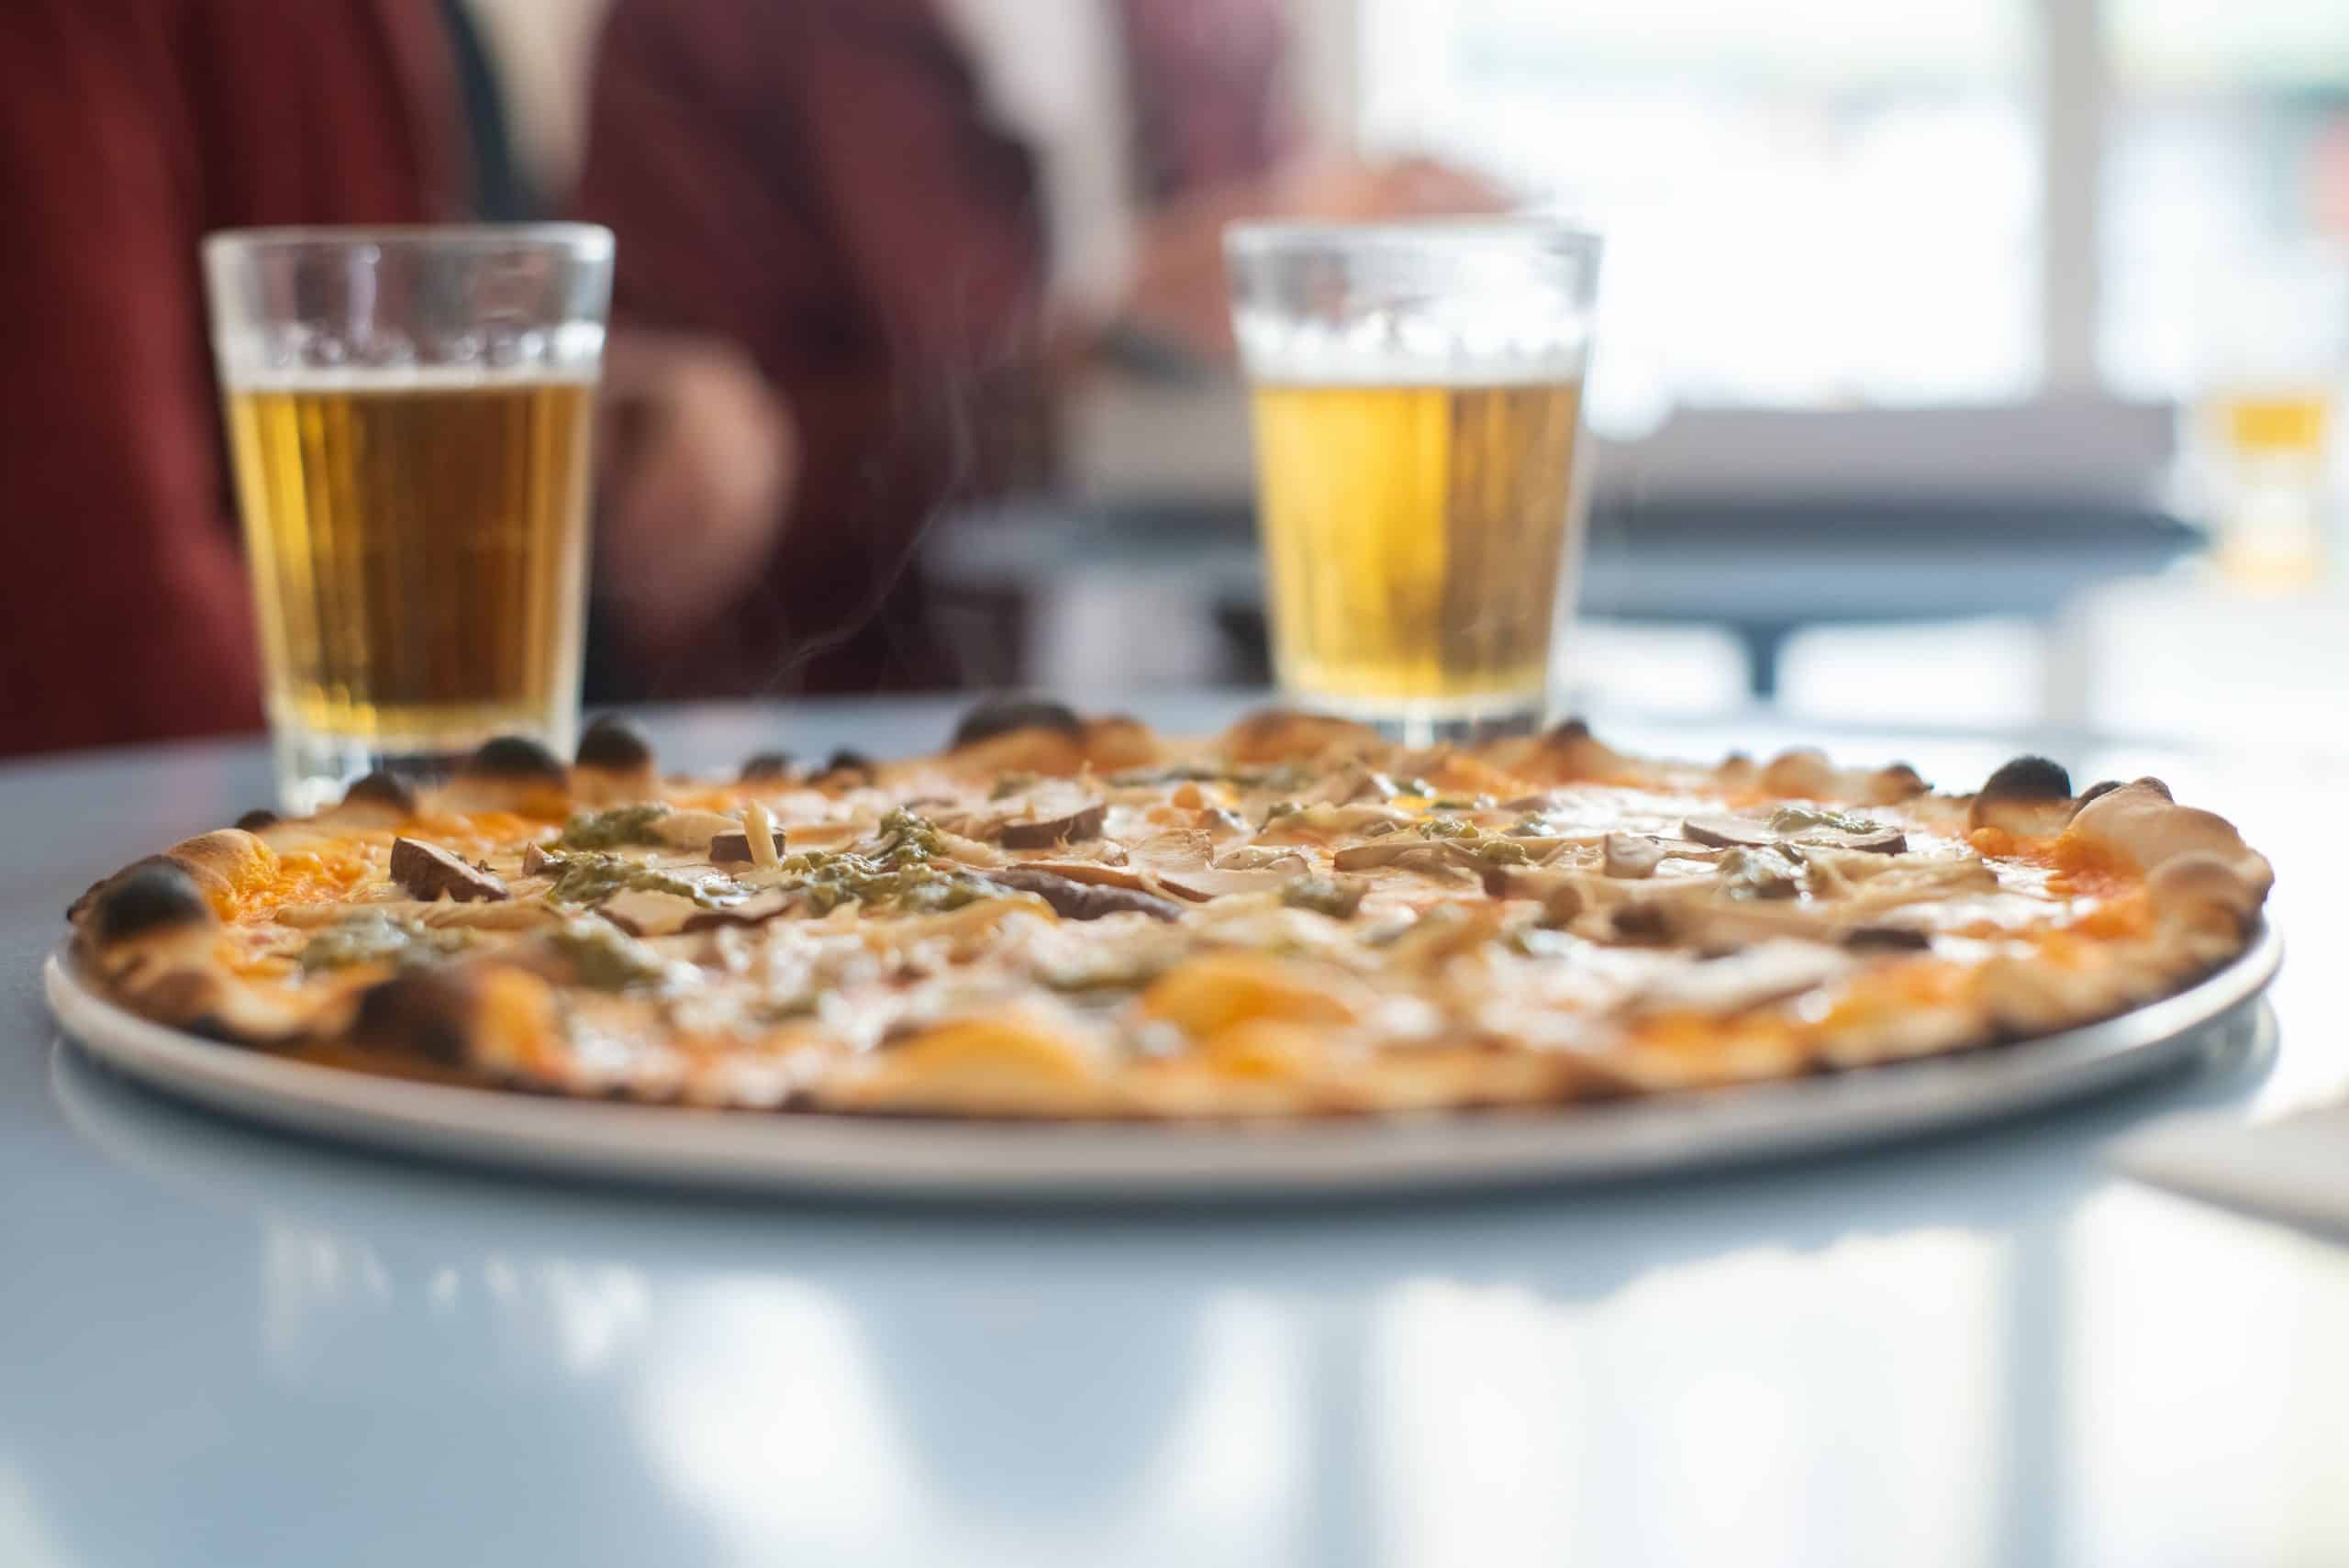 Pizza on a plate with two glasses of beer